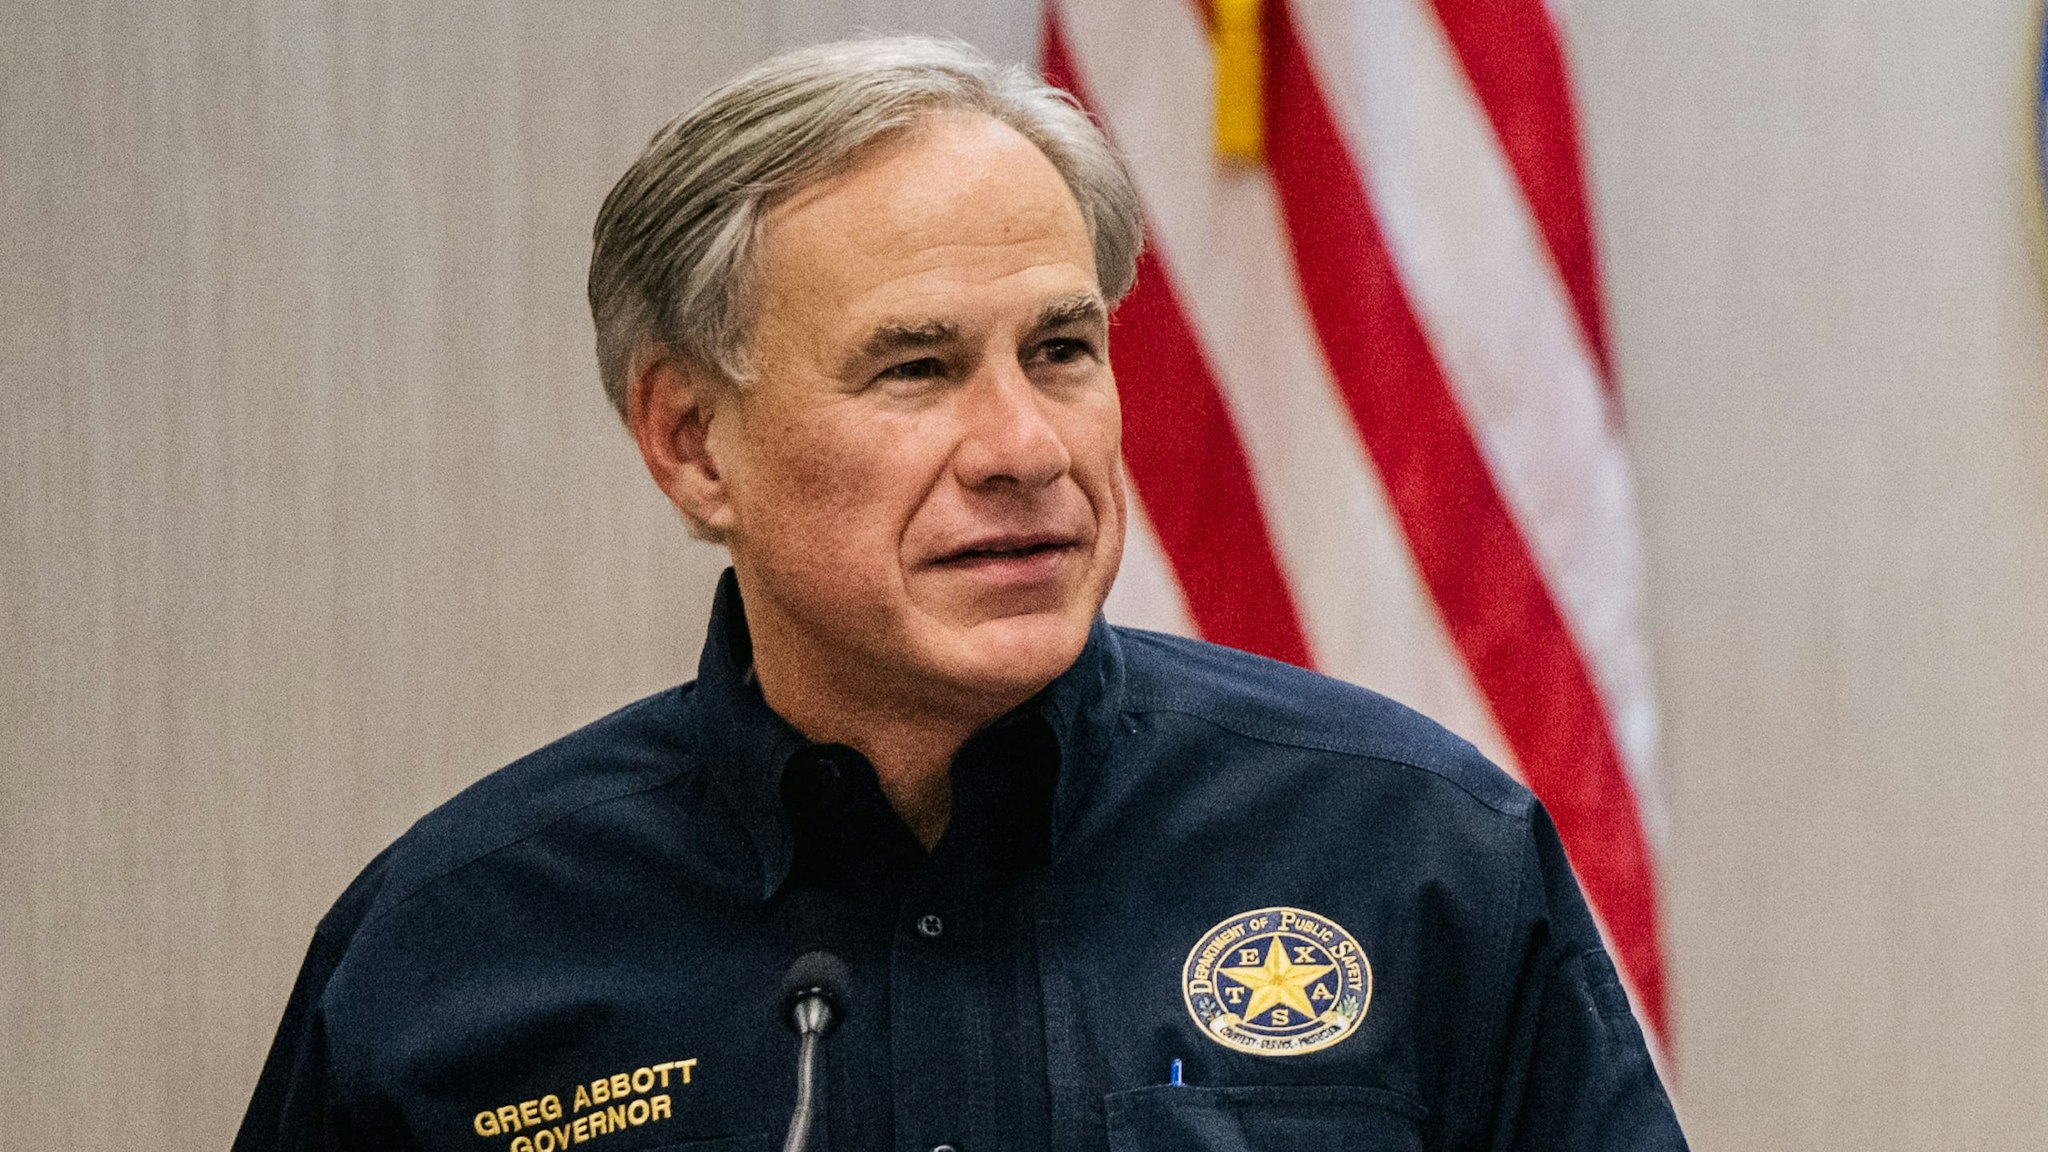 WESLACO, TEXAS - JUNE 30: Texas Gov. Greg Abbott addresses former President Donald Trump during a border security briefing to discuss further plans in securing the southern border wall on June 30, 2021 in Weslaco, Texas. Gov. Abbott has pledged to build a state-funded border wall between Texas and Mexico as a surge of mostly Central American immigrants crossing into the United States has challenged U.S. immigration agencies. So far in 2021, U.S. Border Patrol agents have apprehended more than 900,000 immigrants crossing into the United States on the southern border.